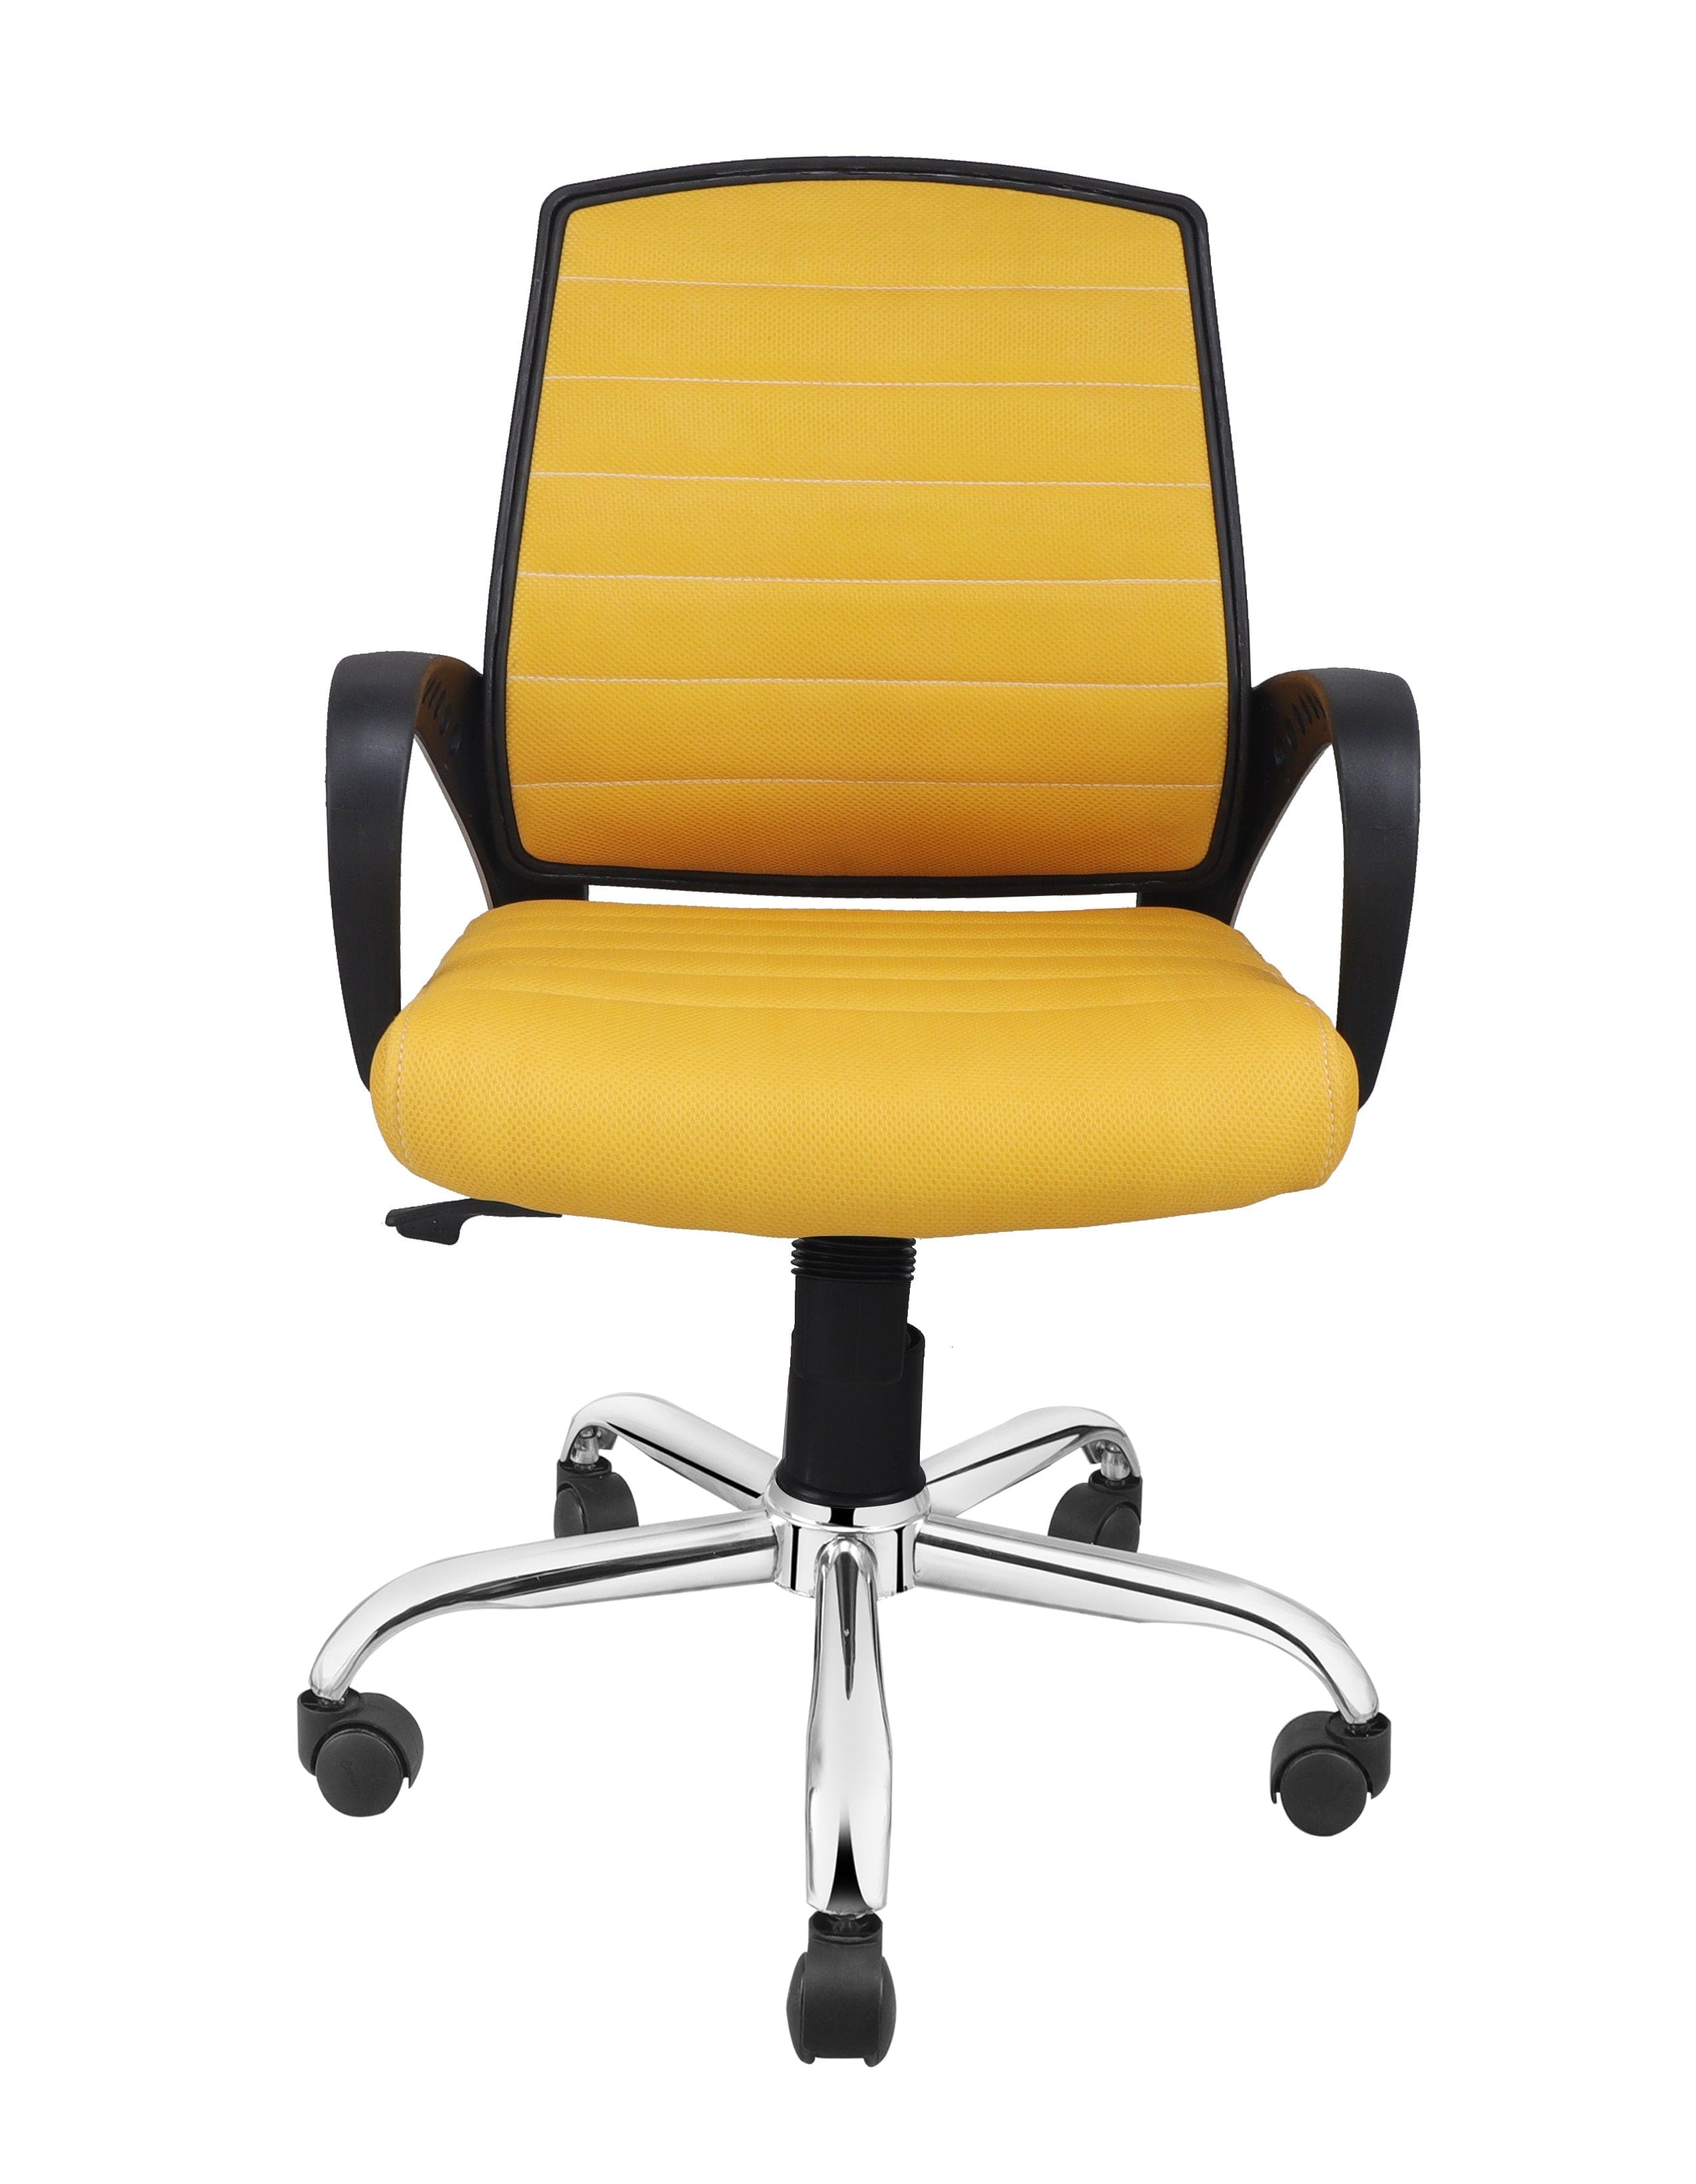 Smart Ergonomic Chair With Breathable Yellow Mesh Fabric